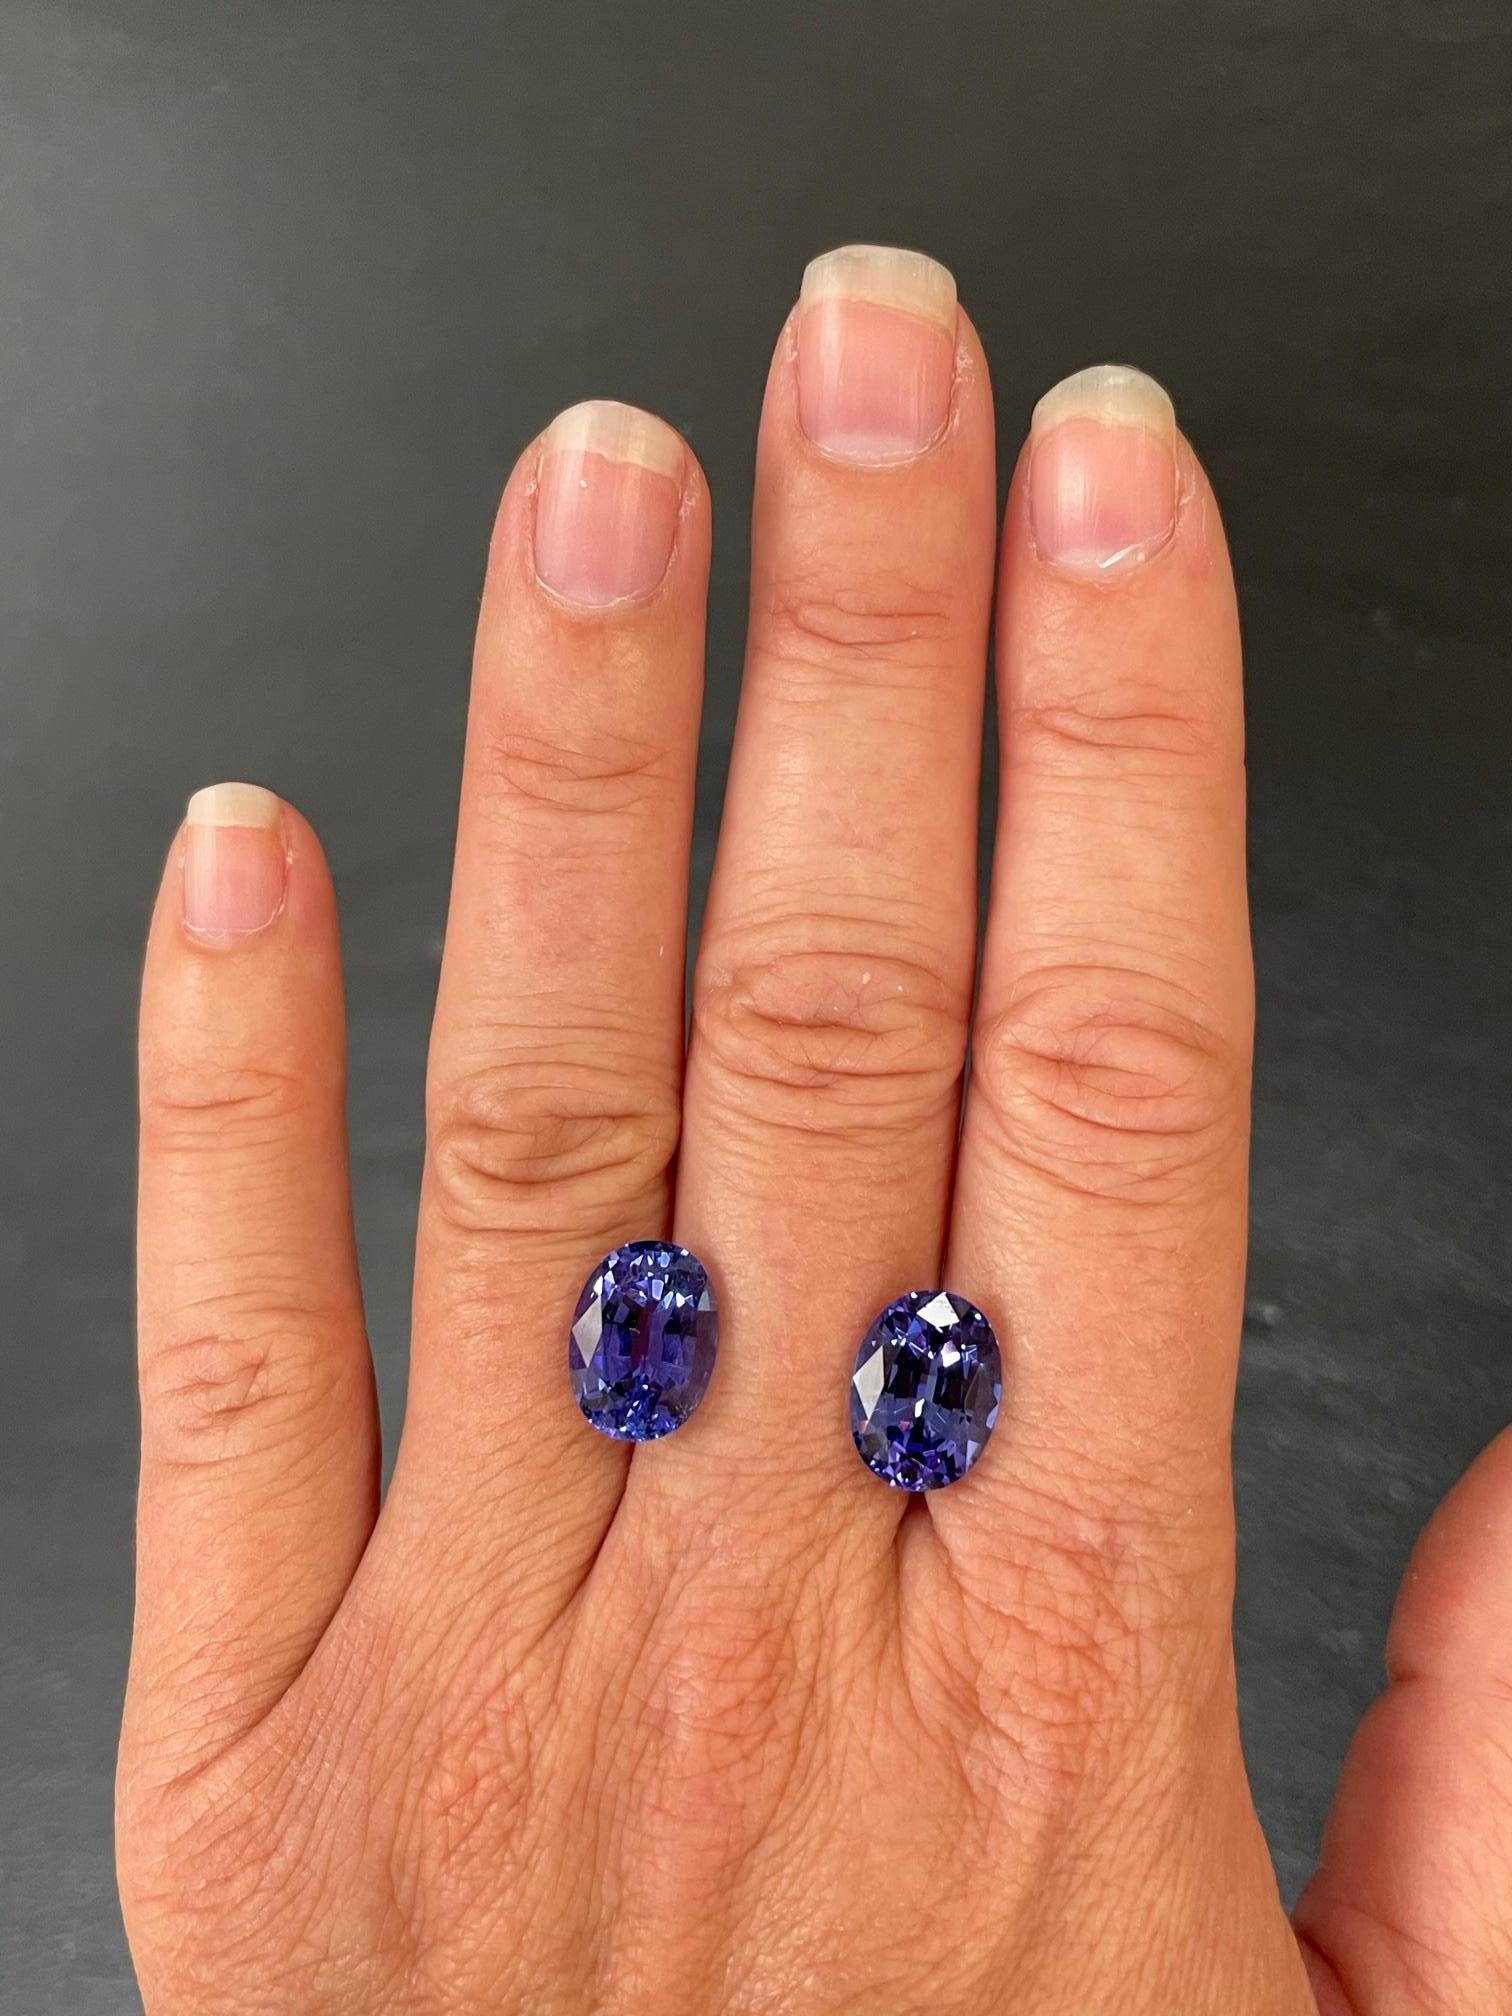 Lively pair of 10.26 carats total, Tanzanite oval gemstones, offered loose for earrings.
Returns are accepted and paid by us within 7 days of delivery.
We offer supreme custom jewelry work upon request. Please contact us for more details.
For your